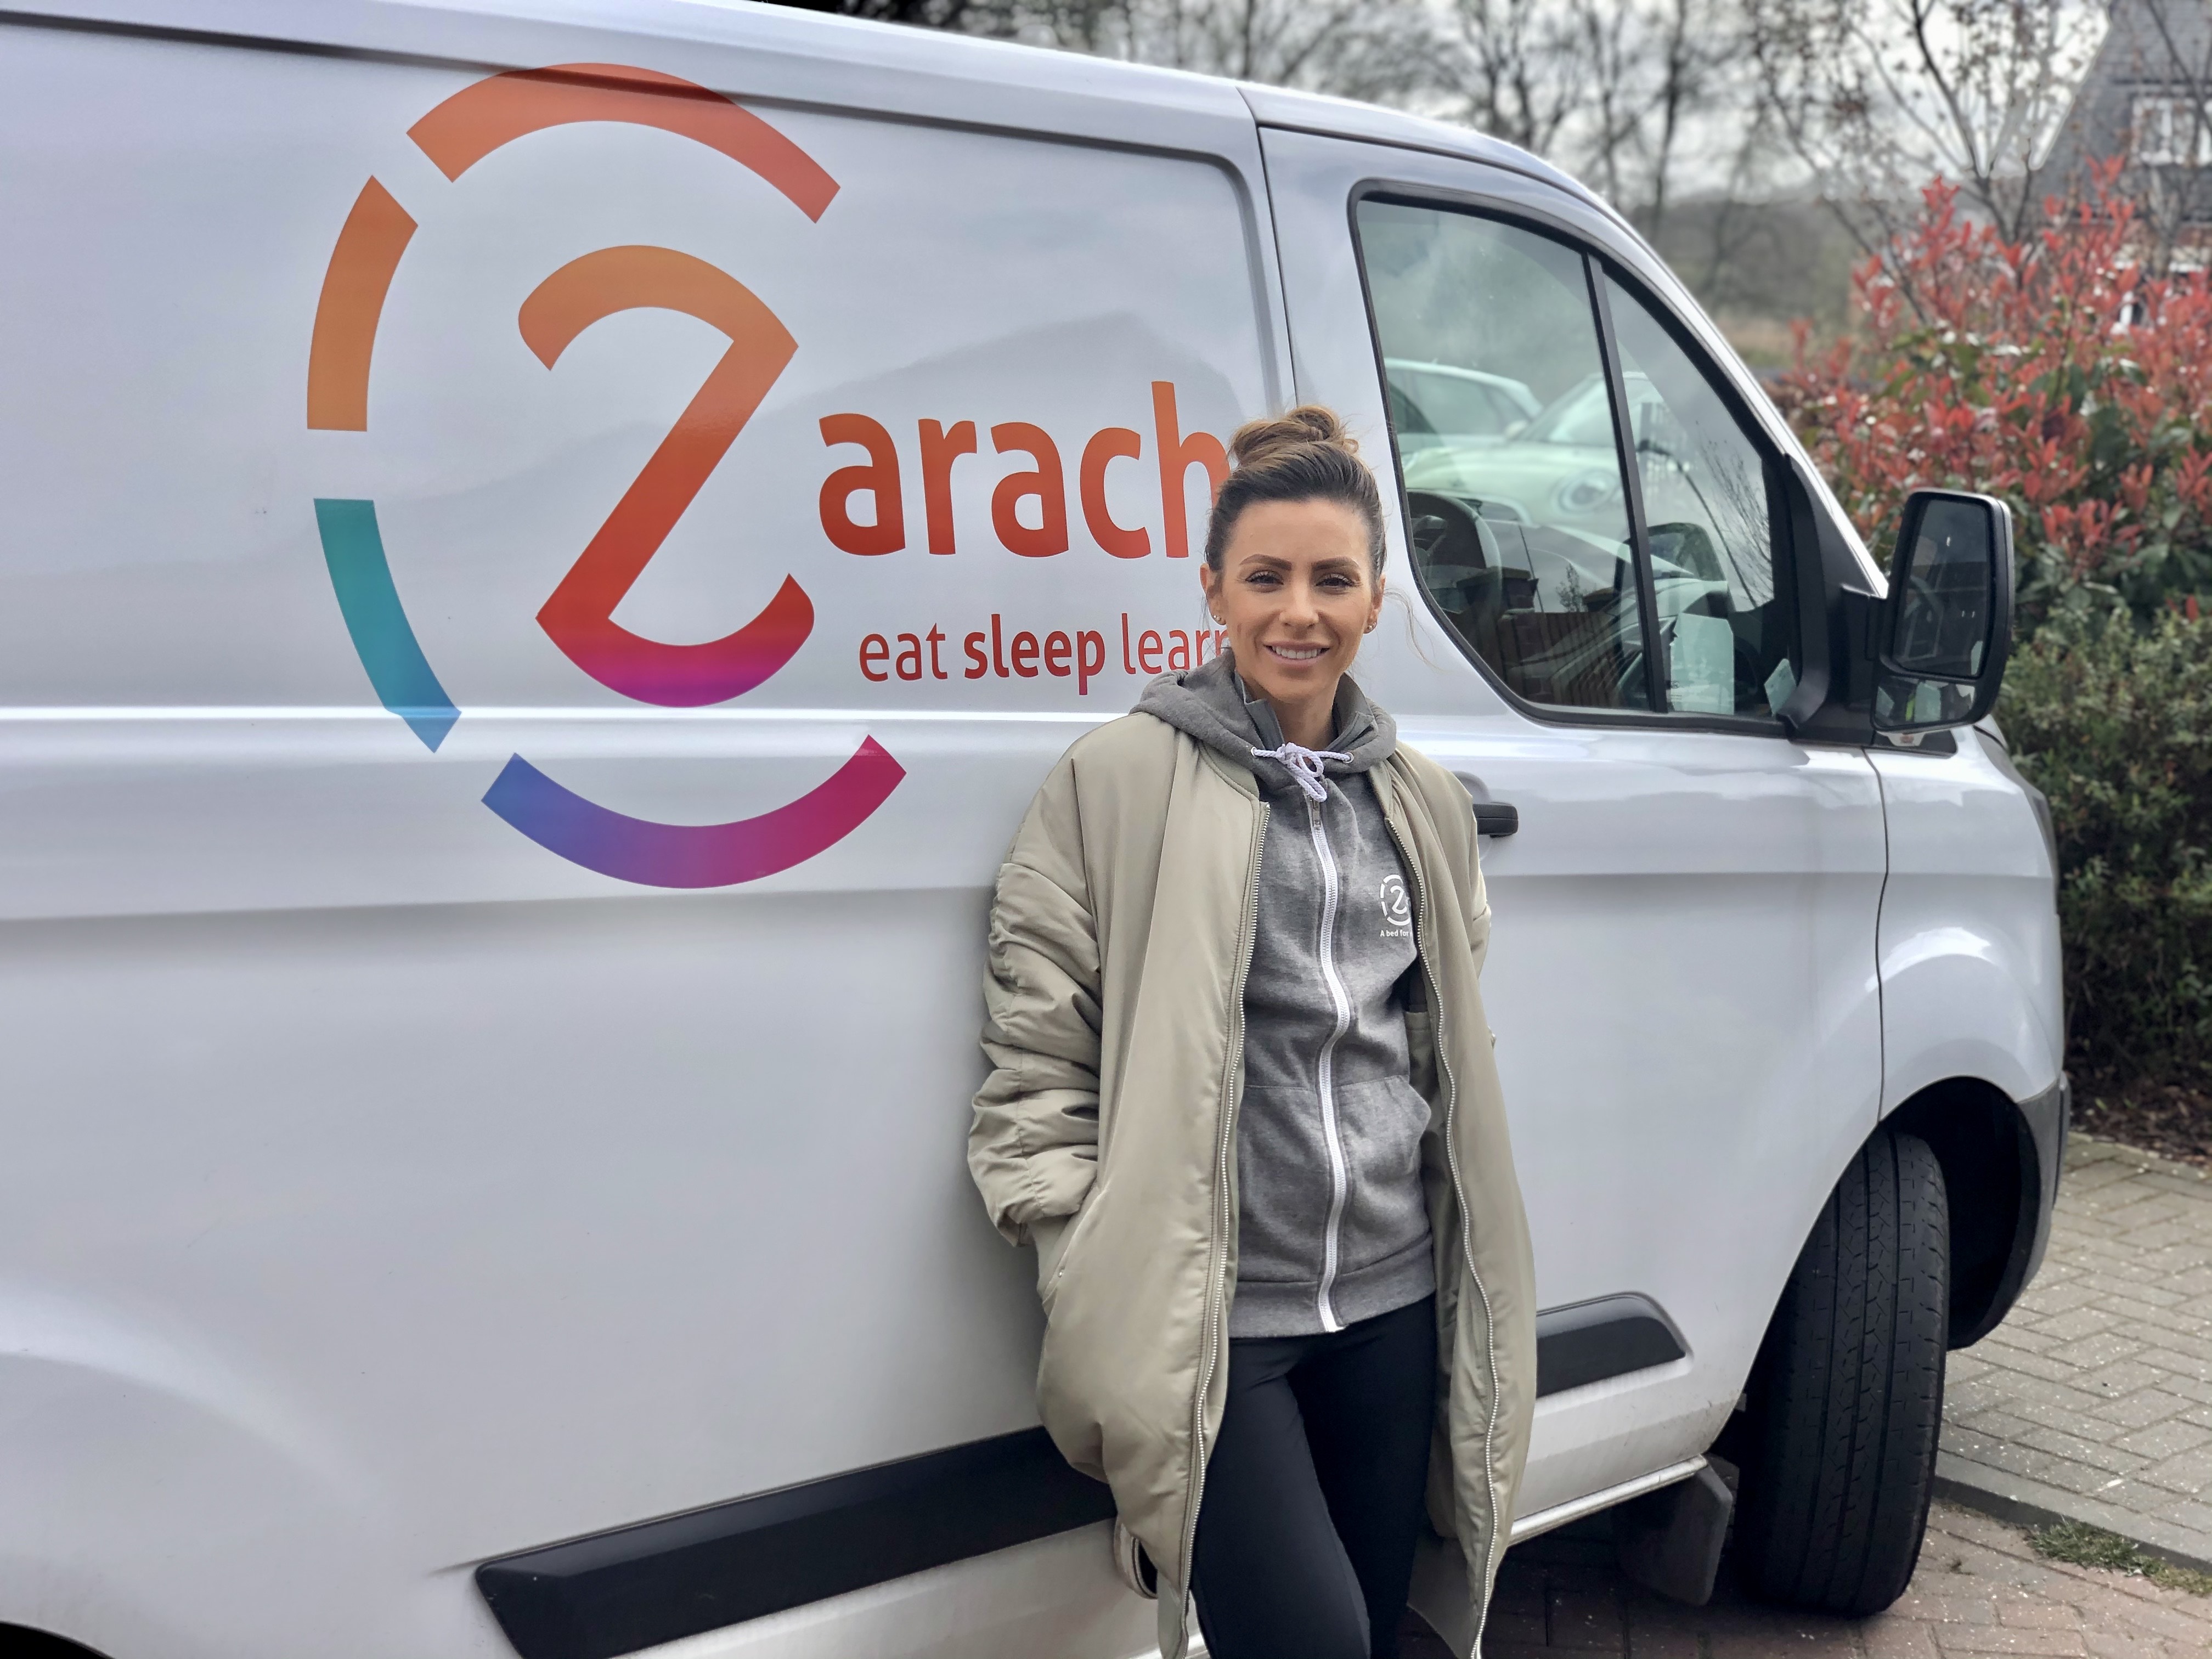 A person stood smiling in front of a Zarach-branded van